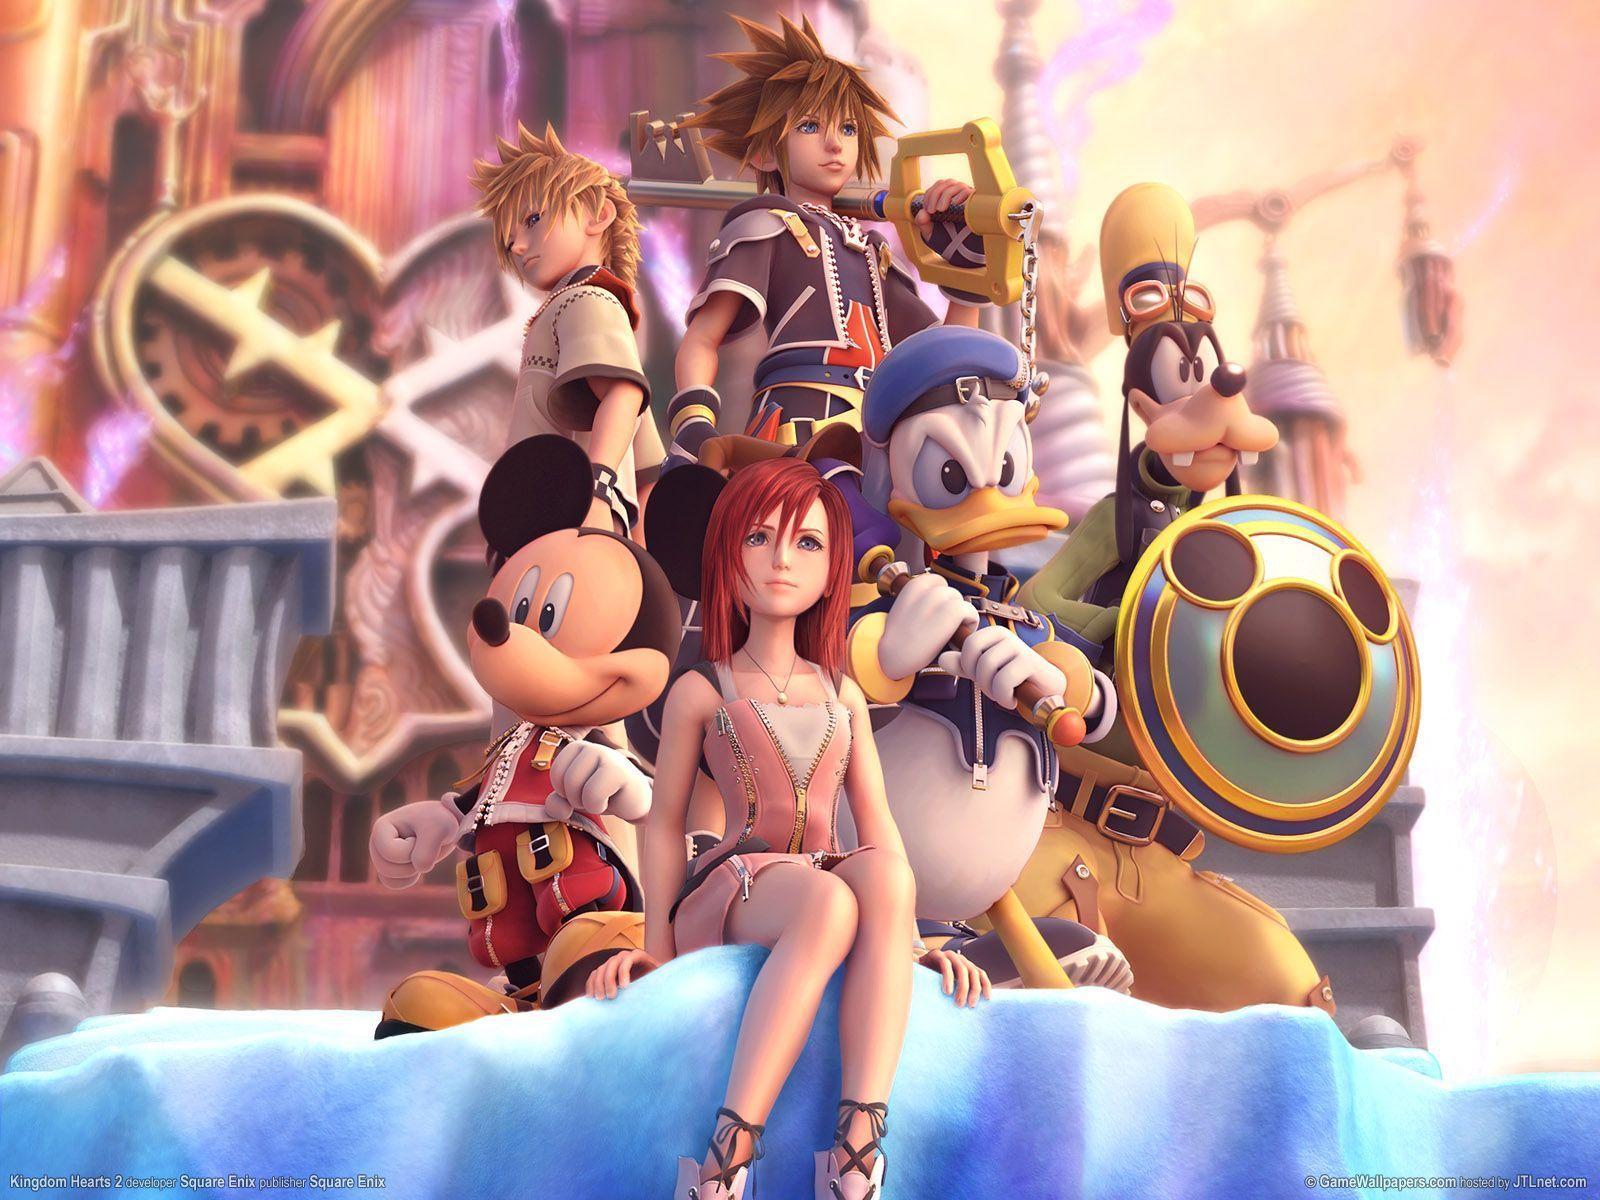 Wallpapers For > Kingdom Hearts Wallpapers Hd Widescreen